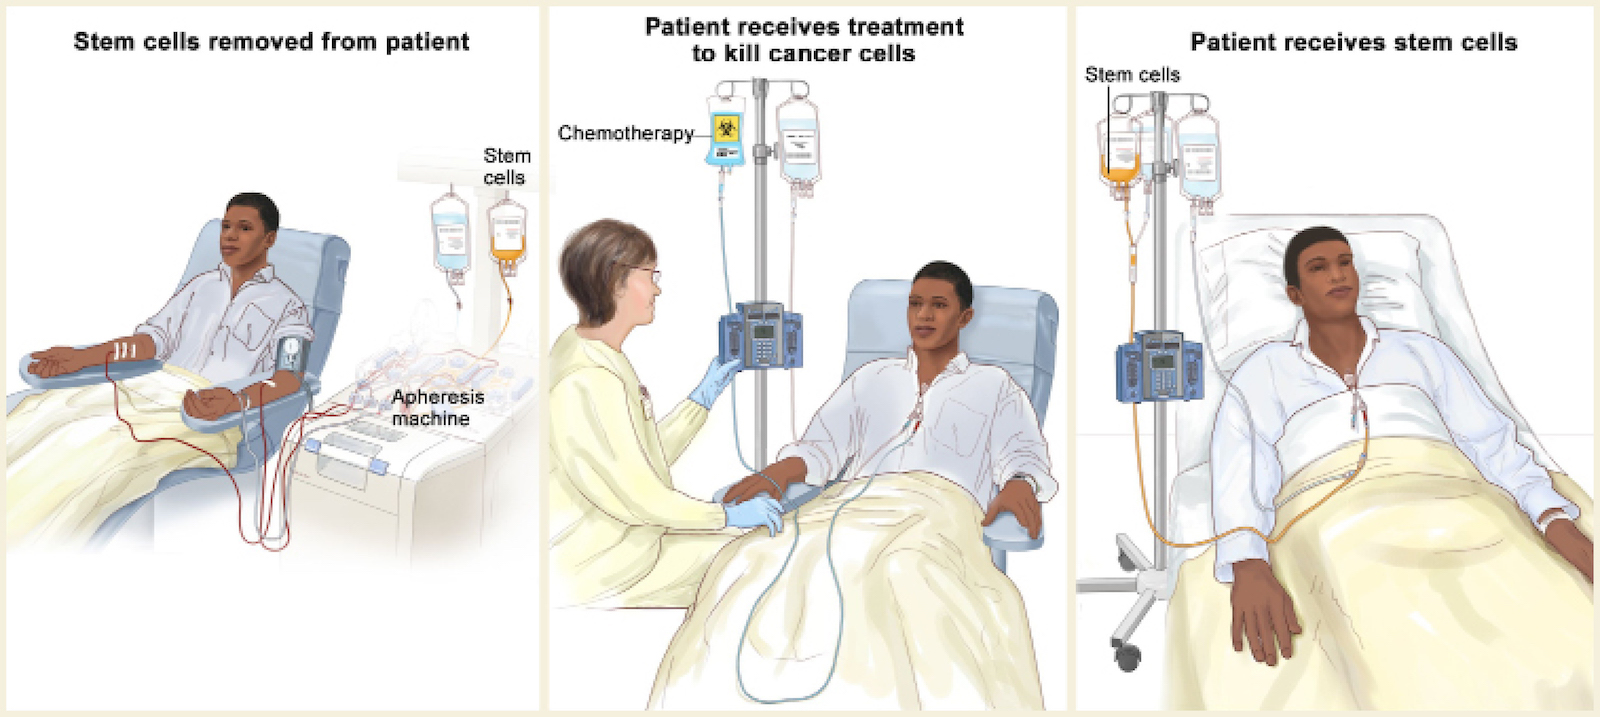 Illustration of the patient's treatment process